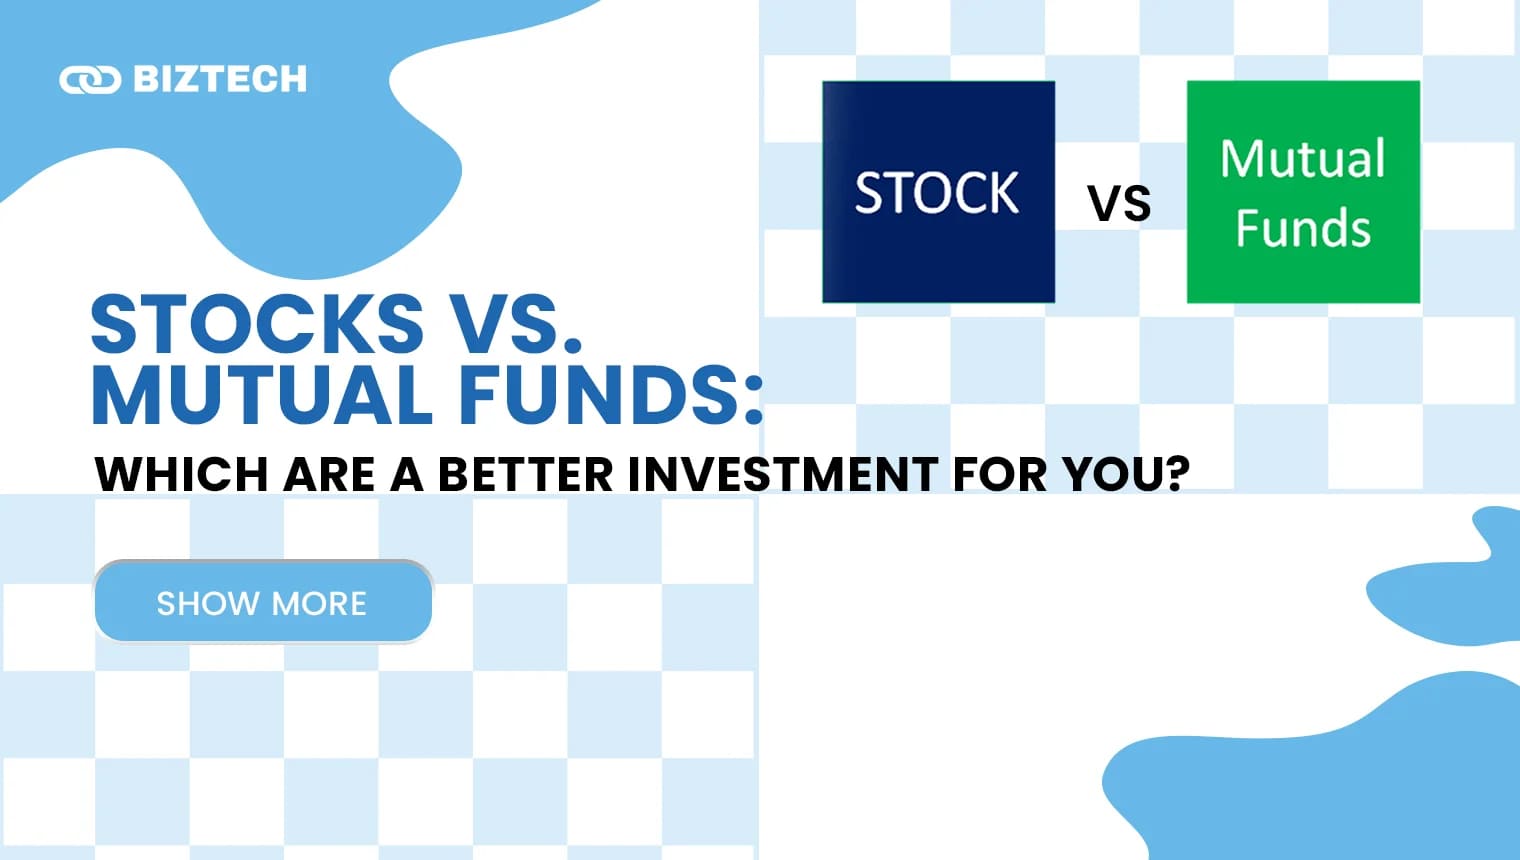 Stocks vs. Mutual Funds Which Are a Better Investment for You